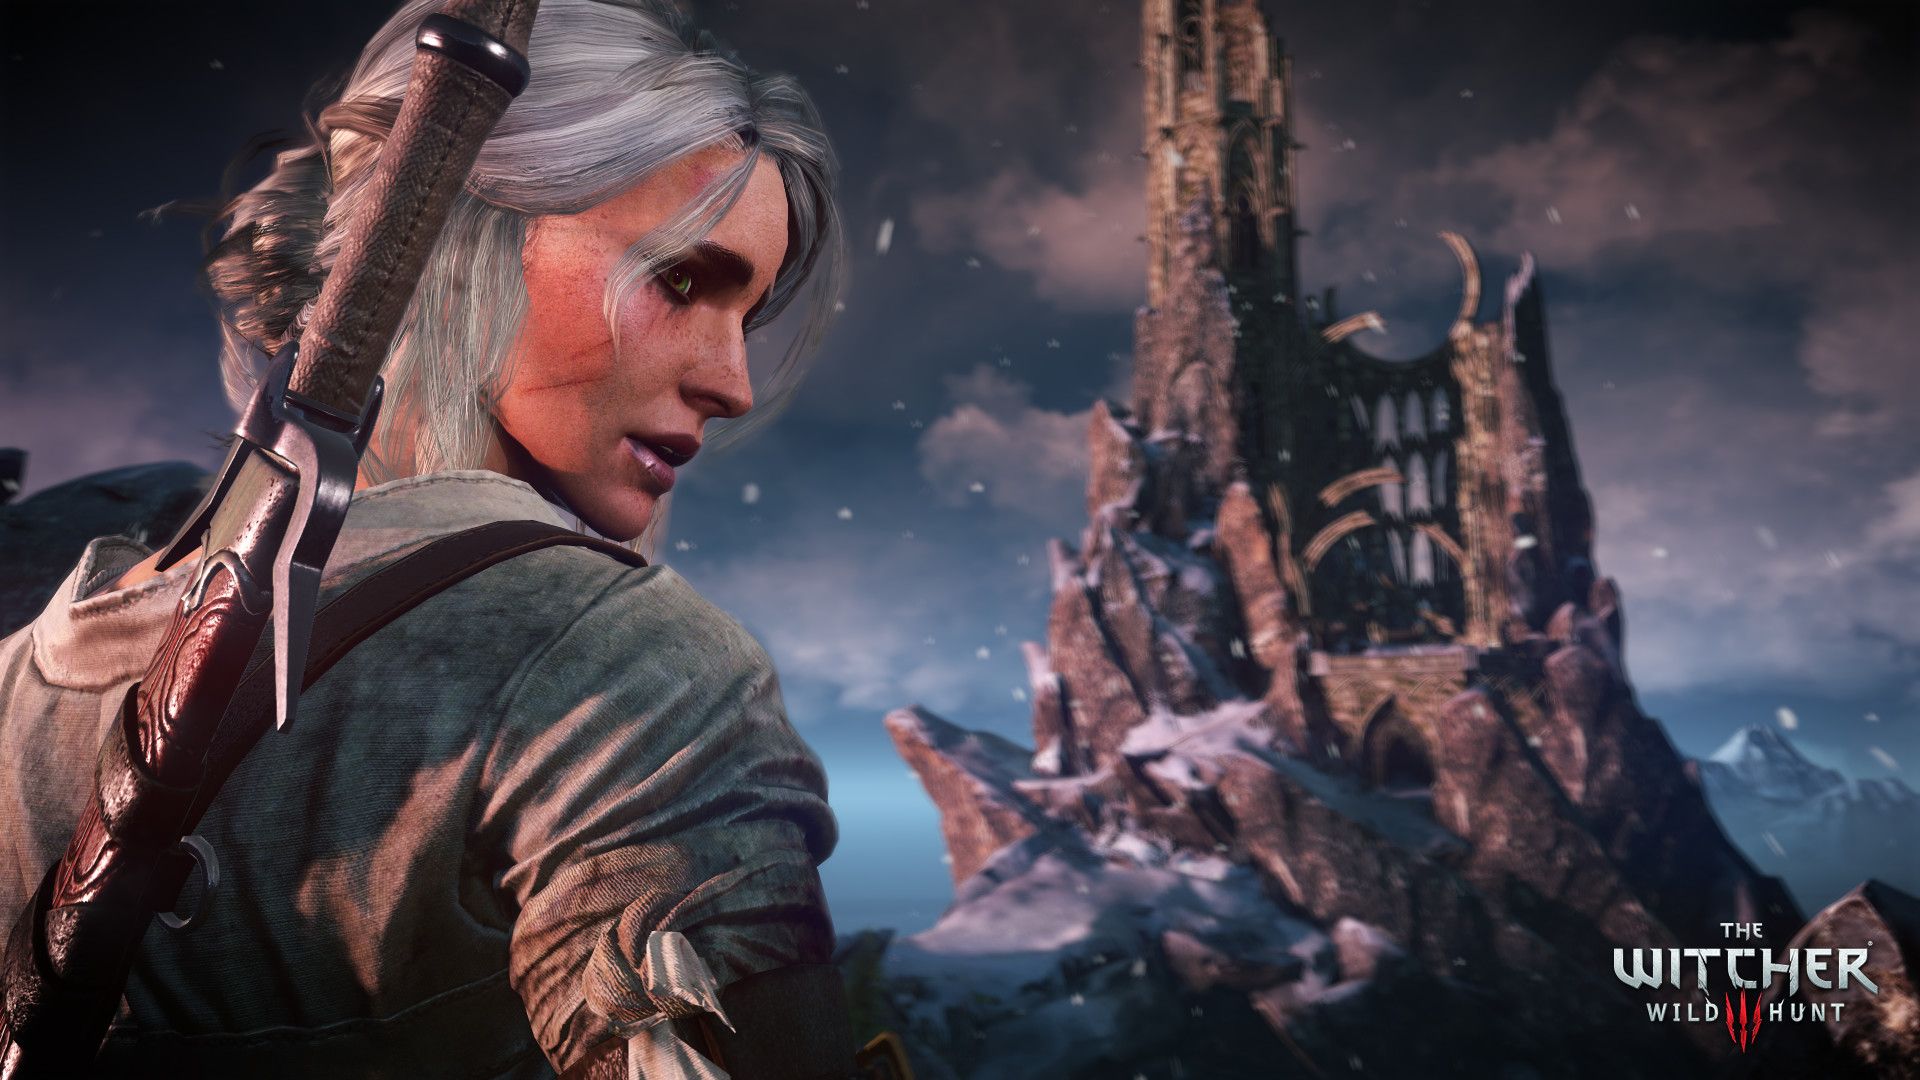 Video game screnshot showing a close-up of the back of a white-haired woman with a sword. In the distance is a wrecked castle partially covered with snow